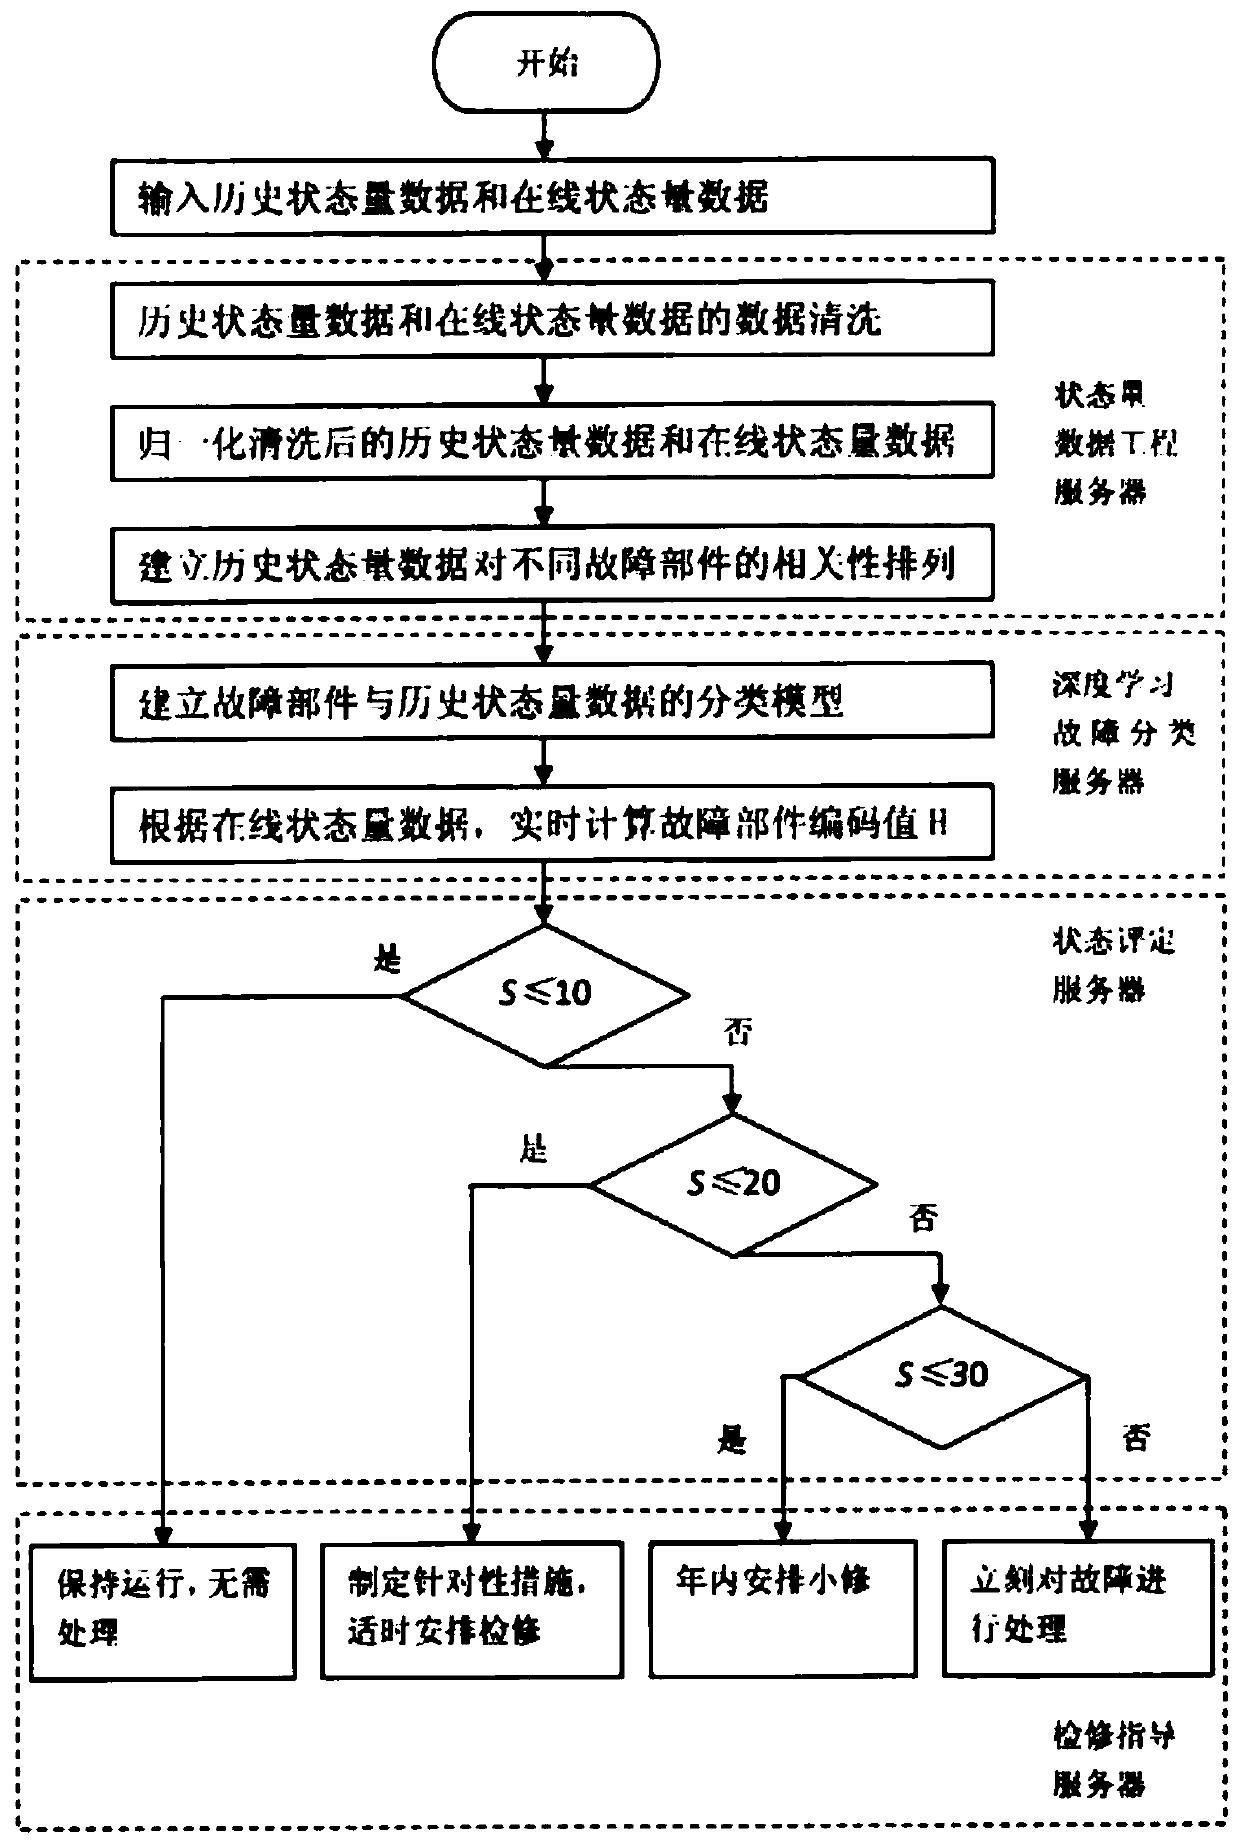 Online evaluation method for air feeder state of power plant